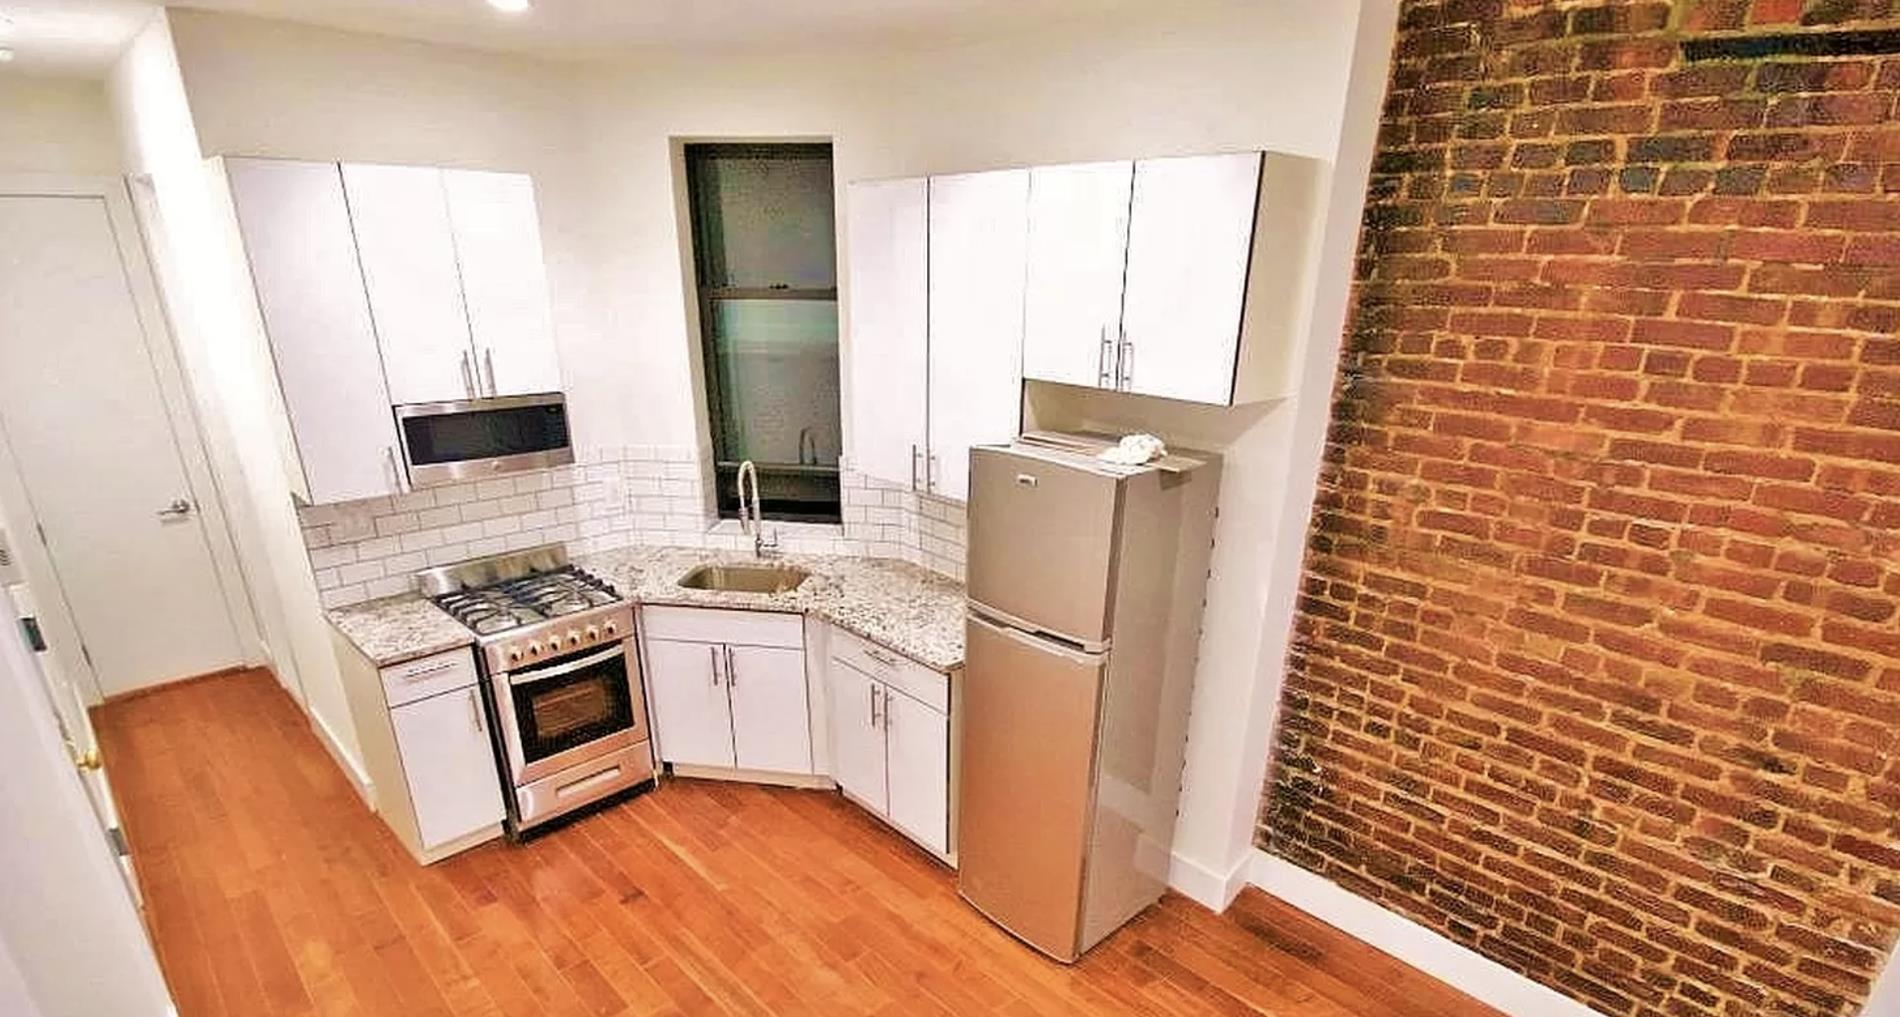 83 Henry Street 15, Lower East Side, Downtown, NYC - 2 Bedrooms  
1 Bathrooms  
4 Rooms - 